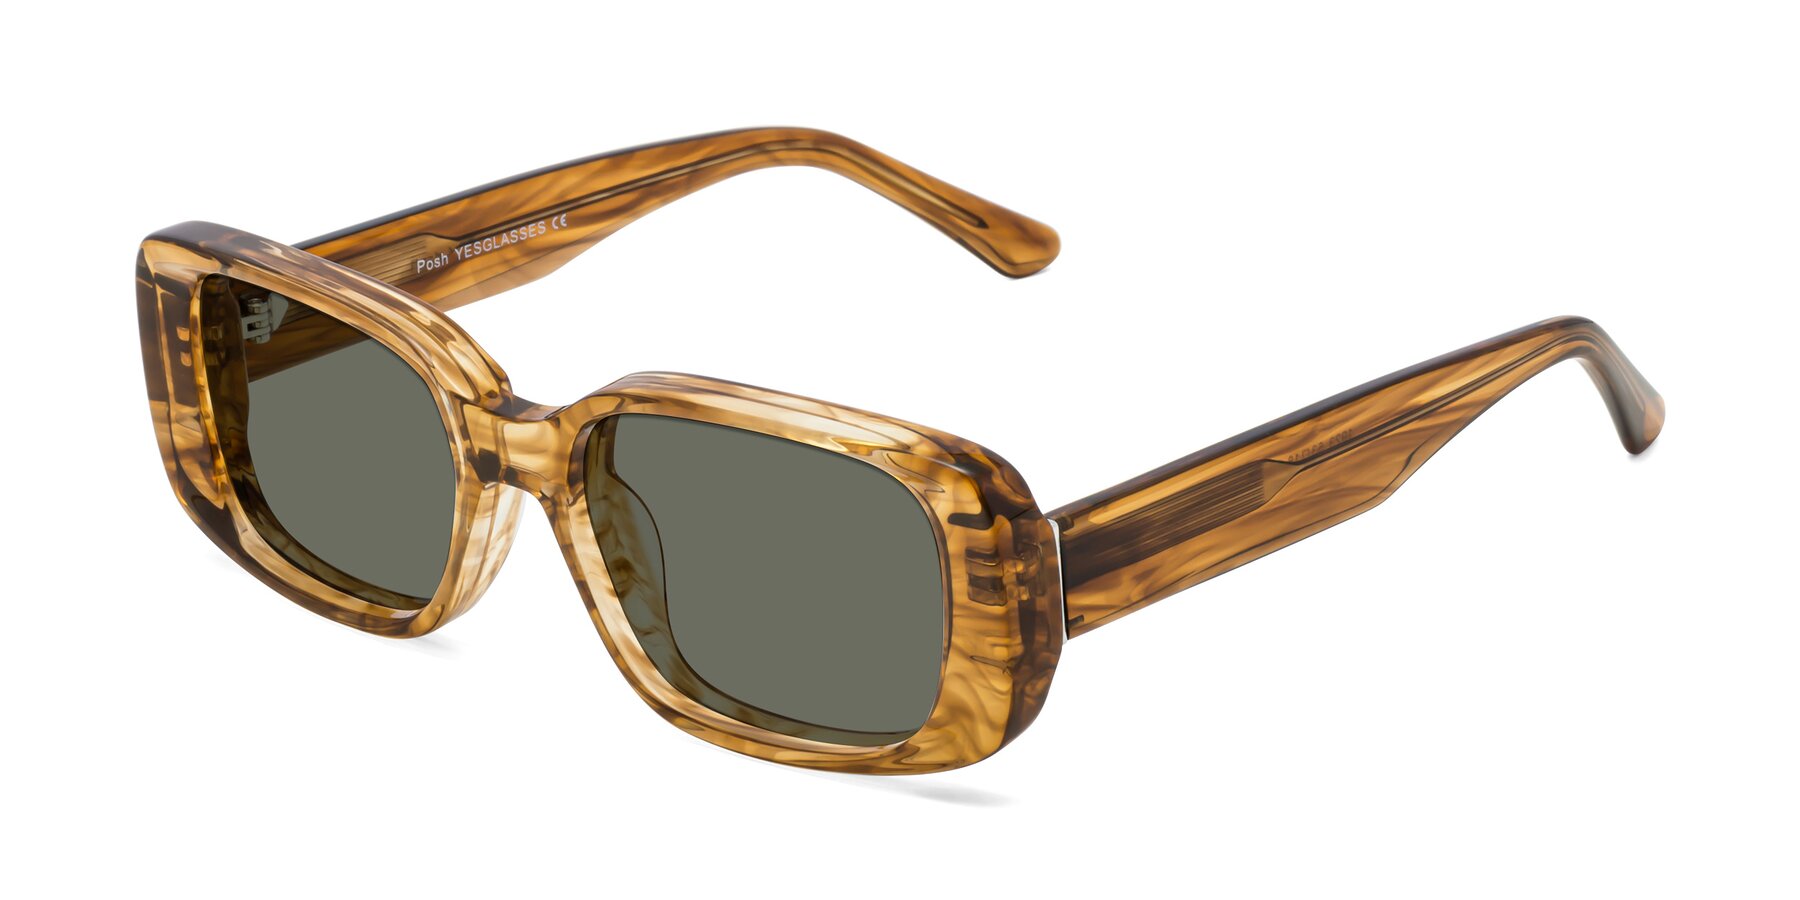 Angle of Posh in Stripe Amber with Gray Polarized Lenses